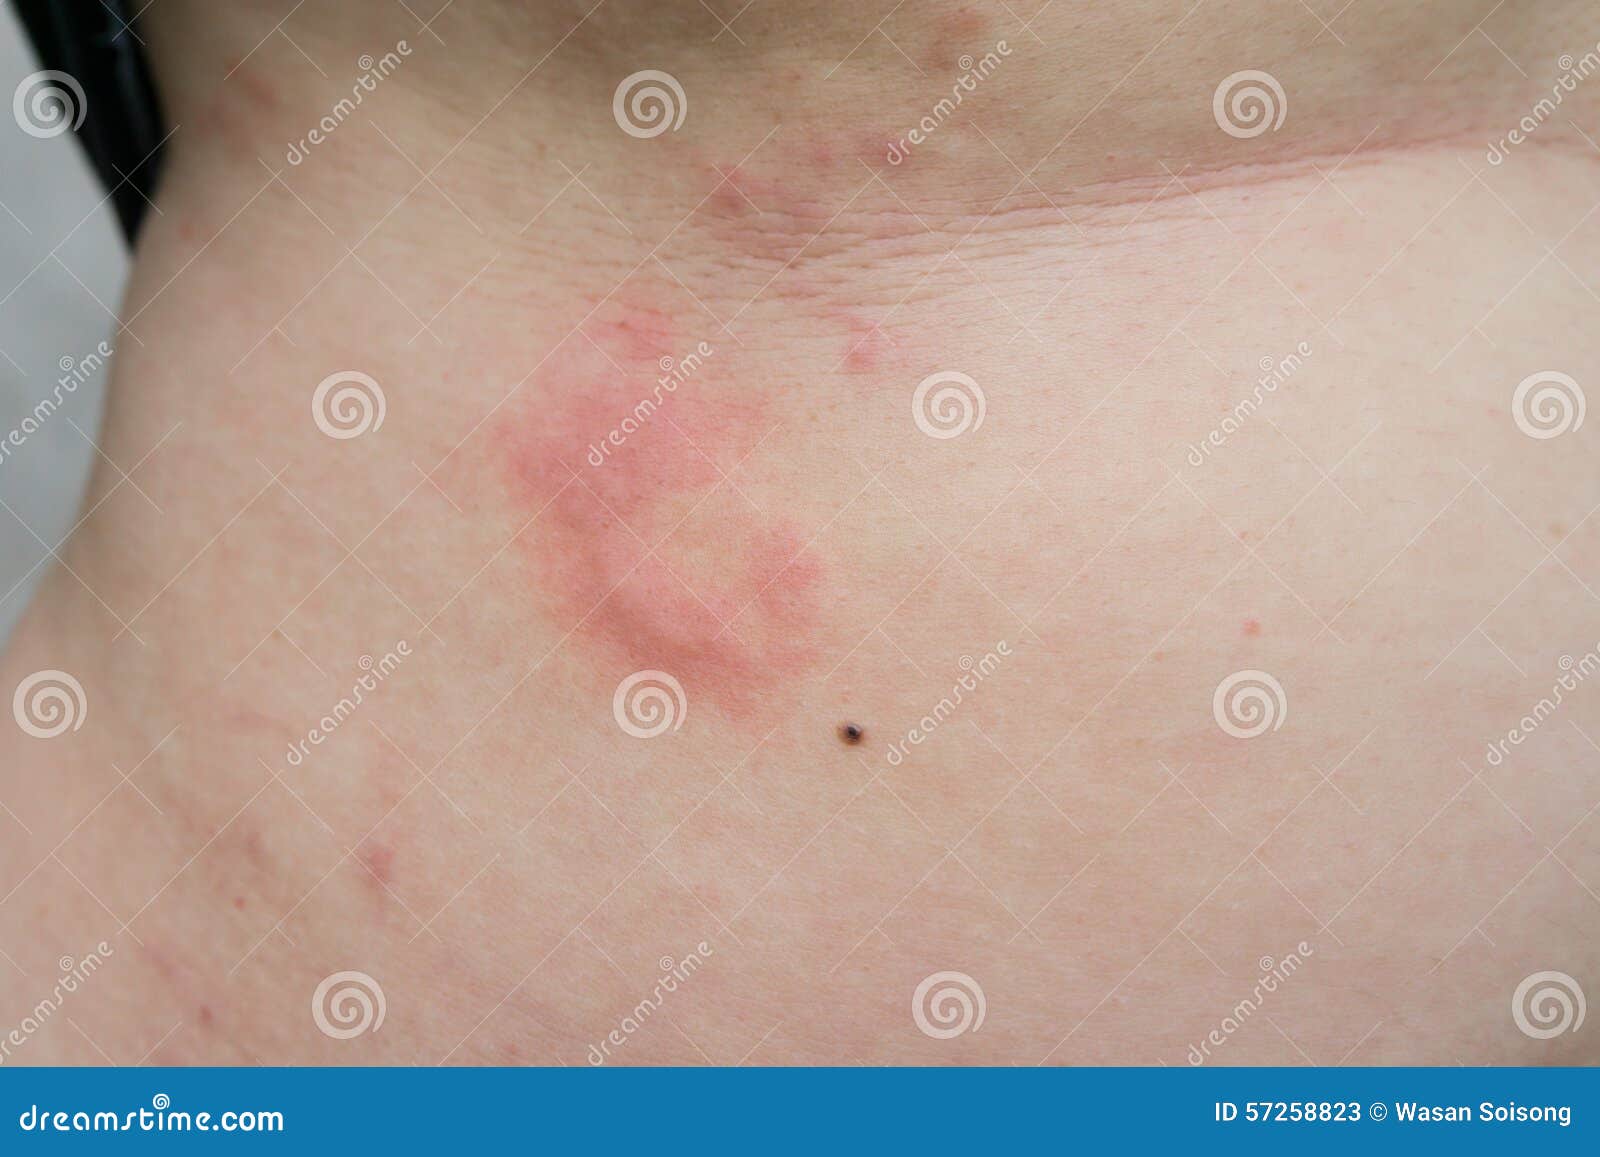 a woman is urticaria on belly